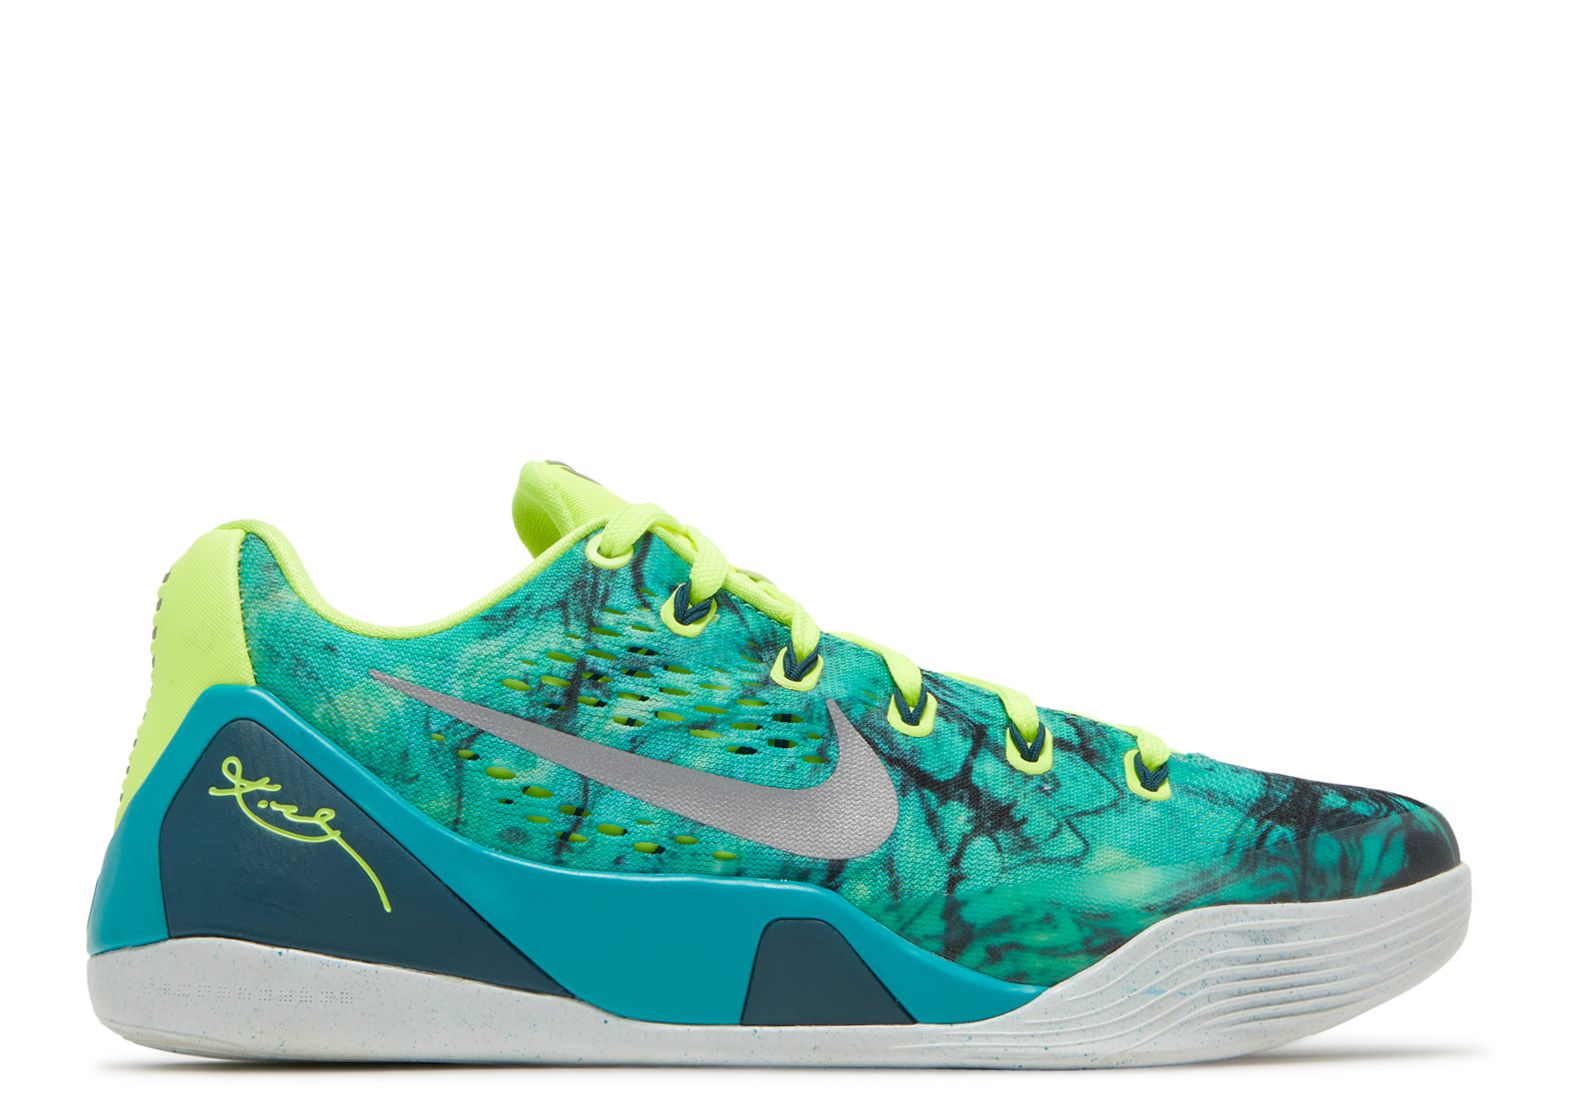 what the kobe 9 release date